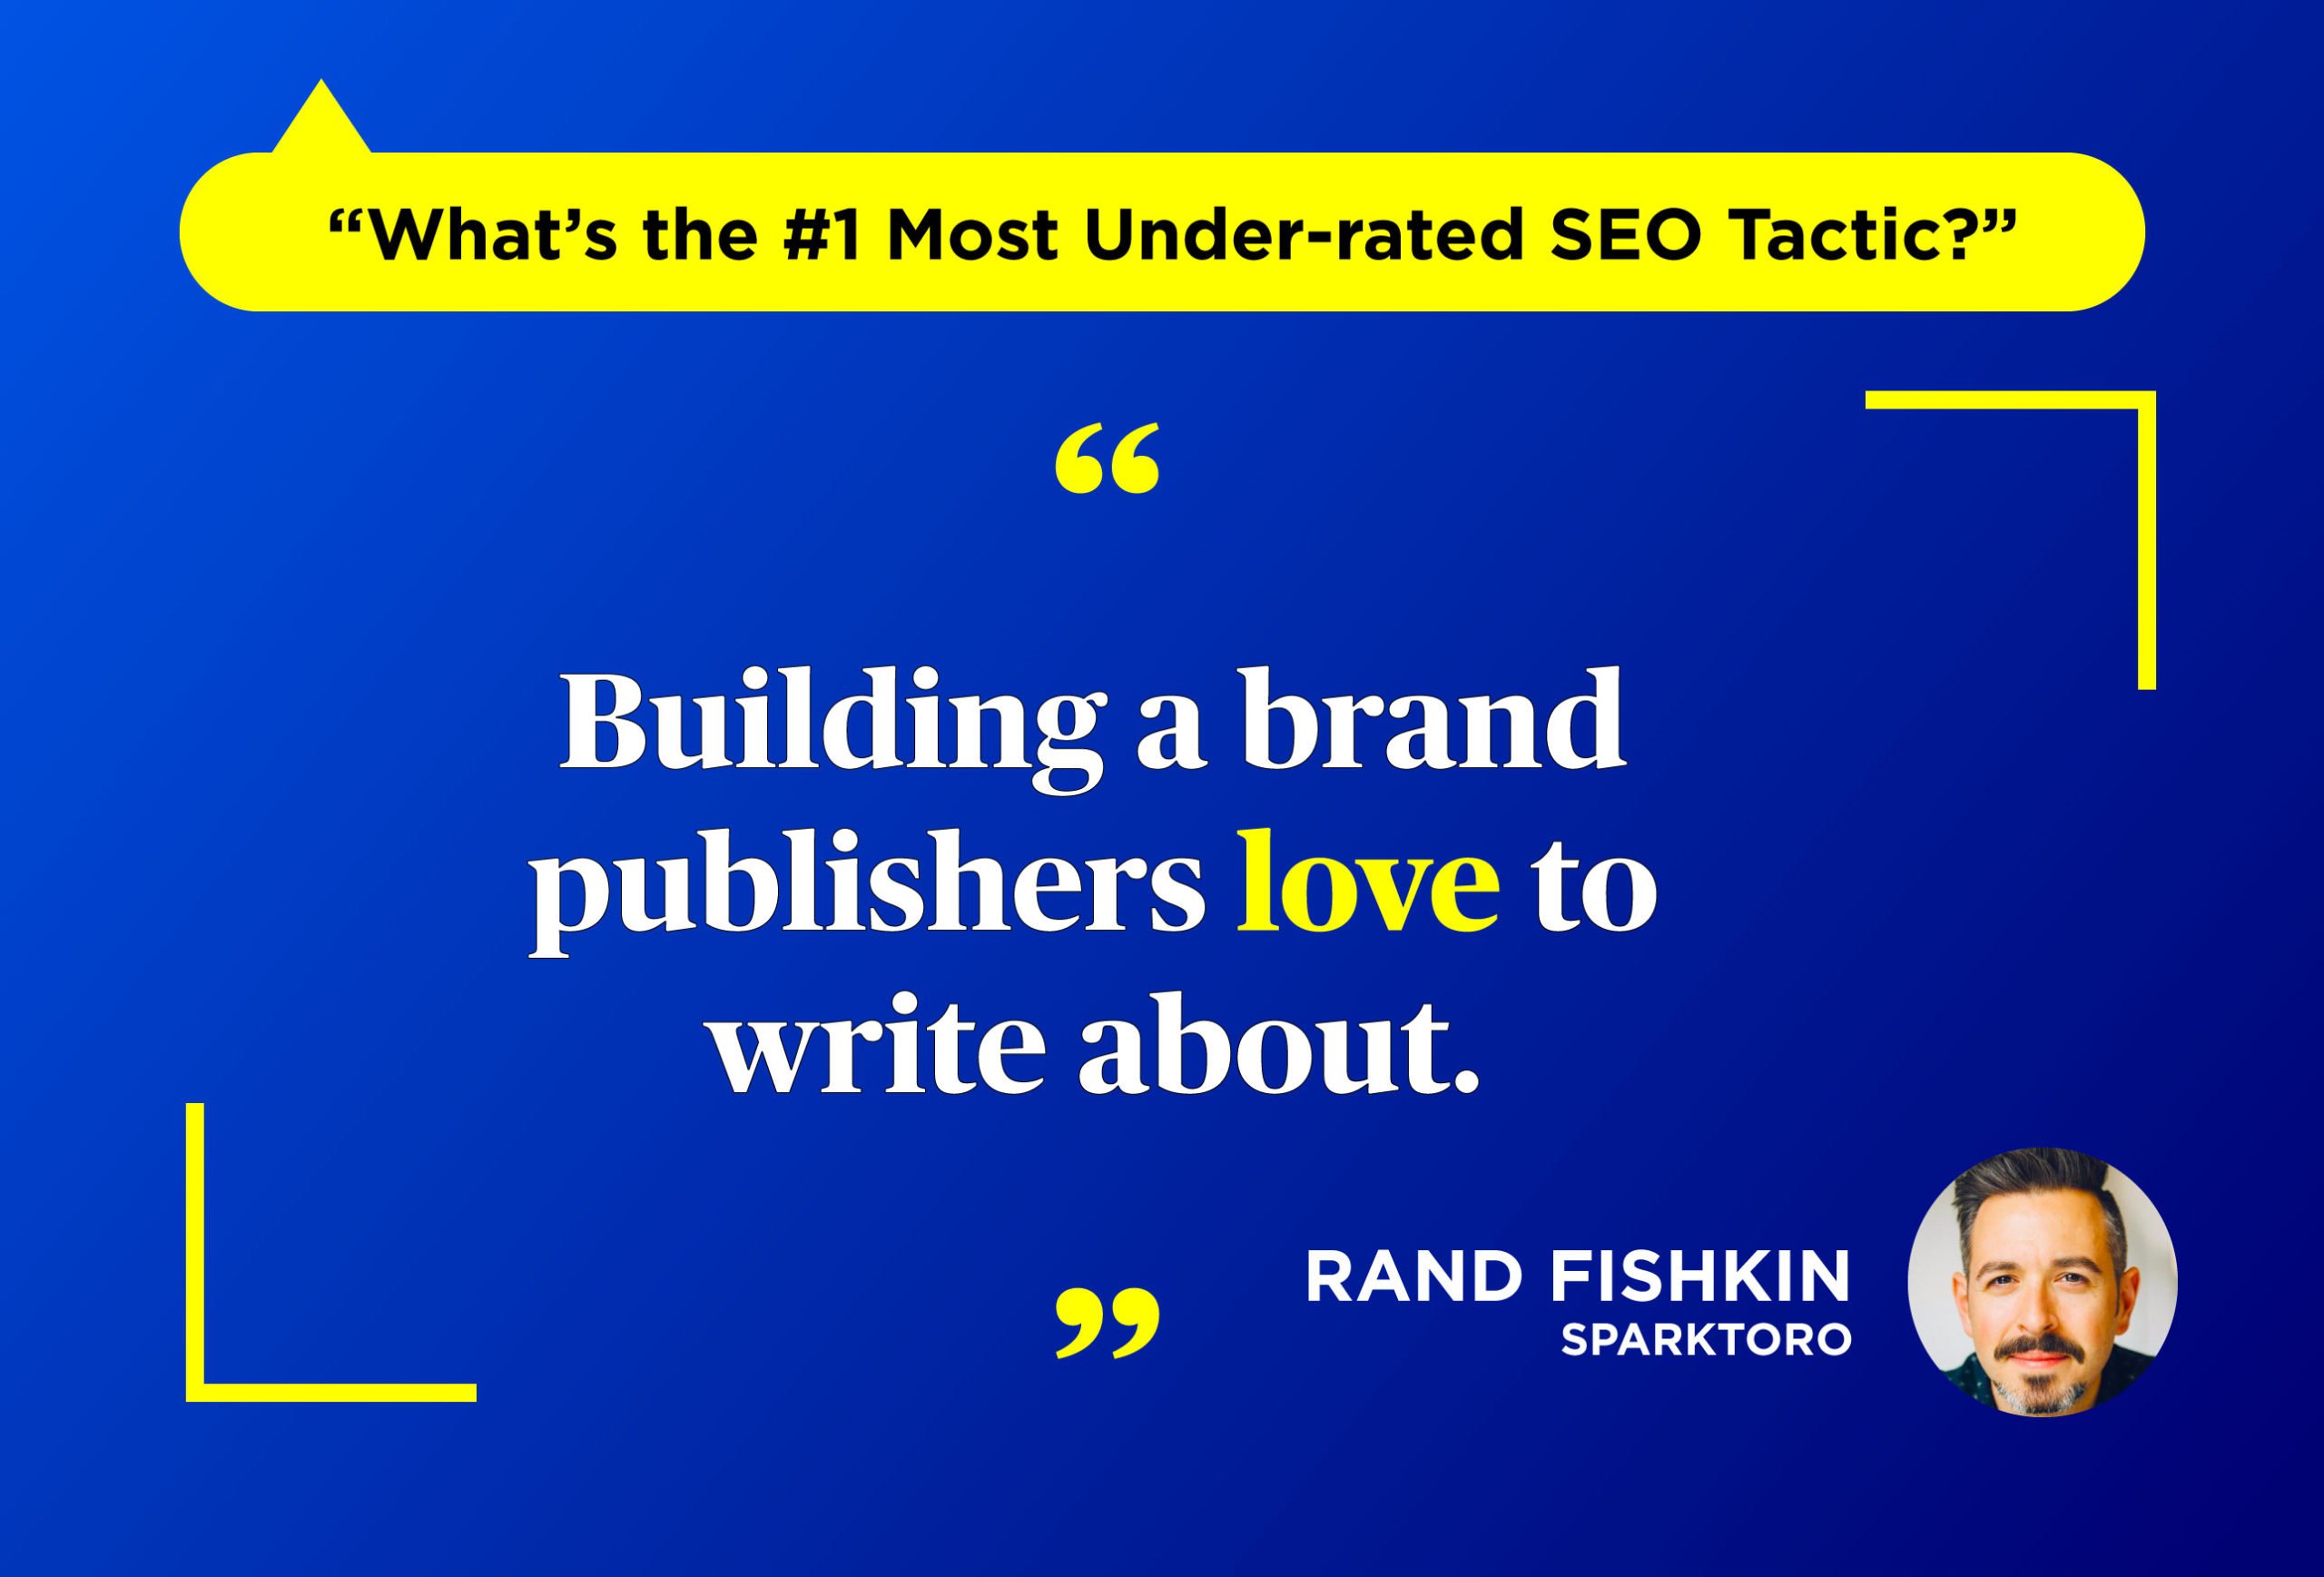 What's The Most under-rated SEO tactic - Building a brand according to Rand Fishkin of Moz and SparkToro